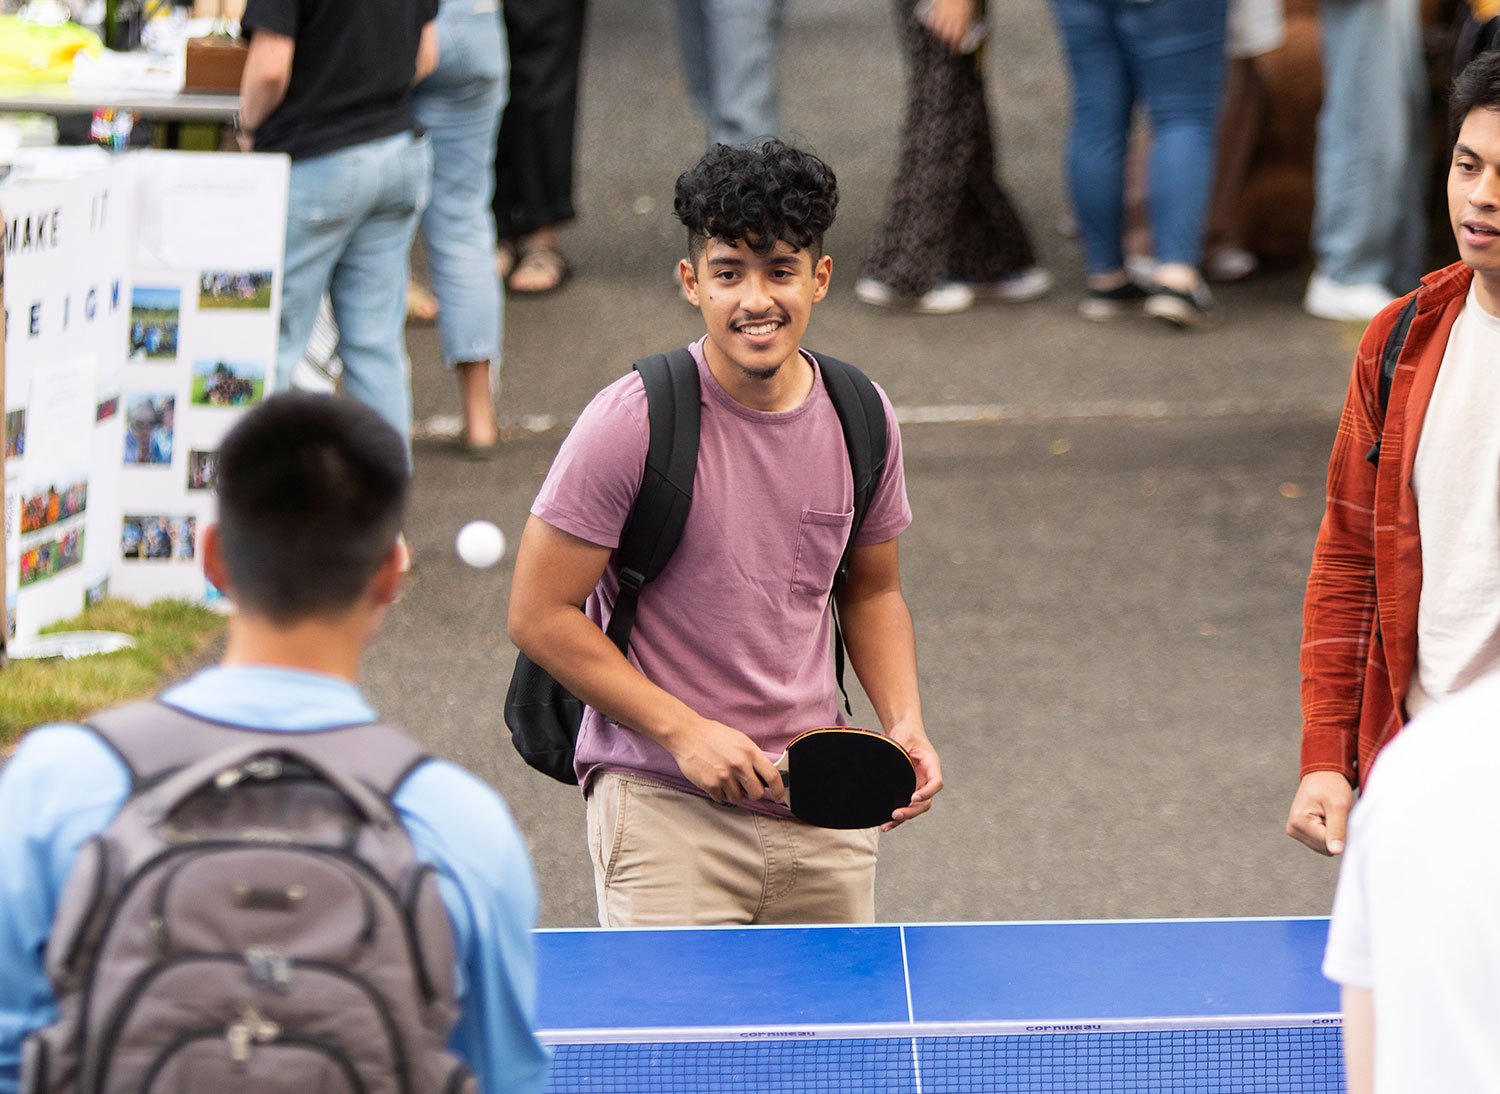 PLU students play ping pong at an outdoor involvement fair where all the student clubs have tables and talk to new students.